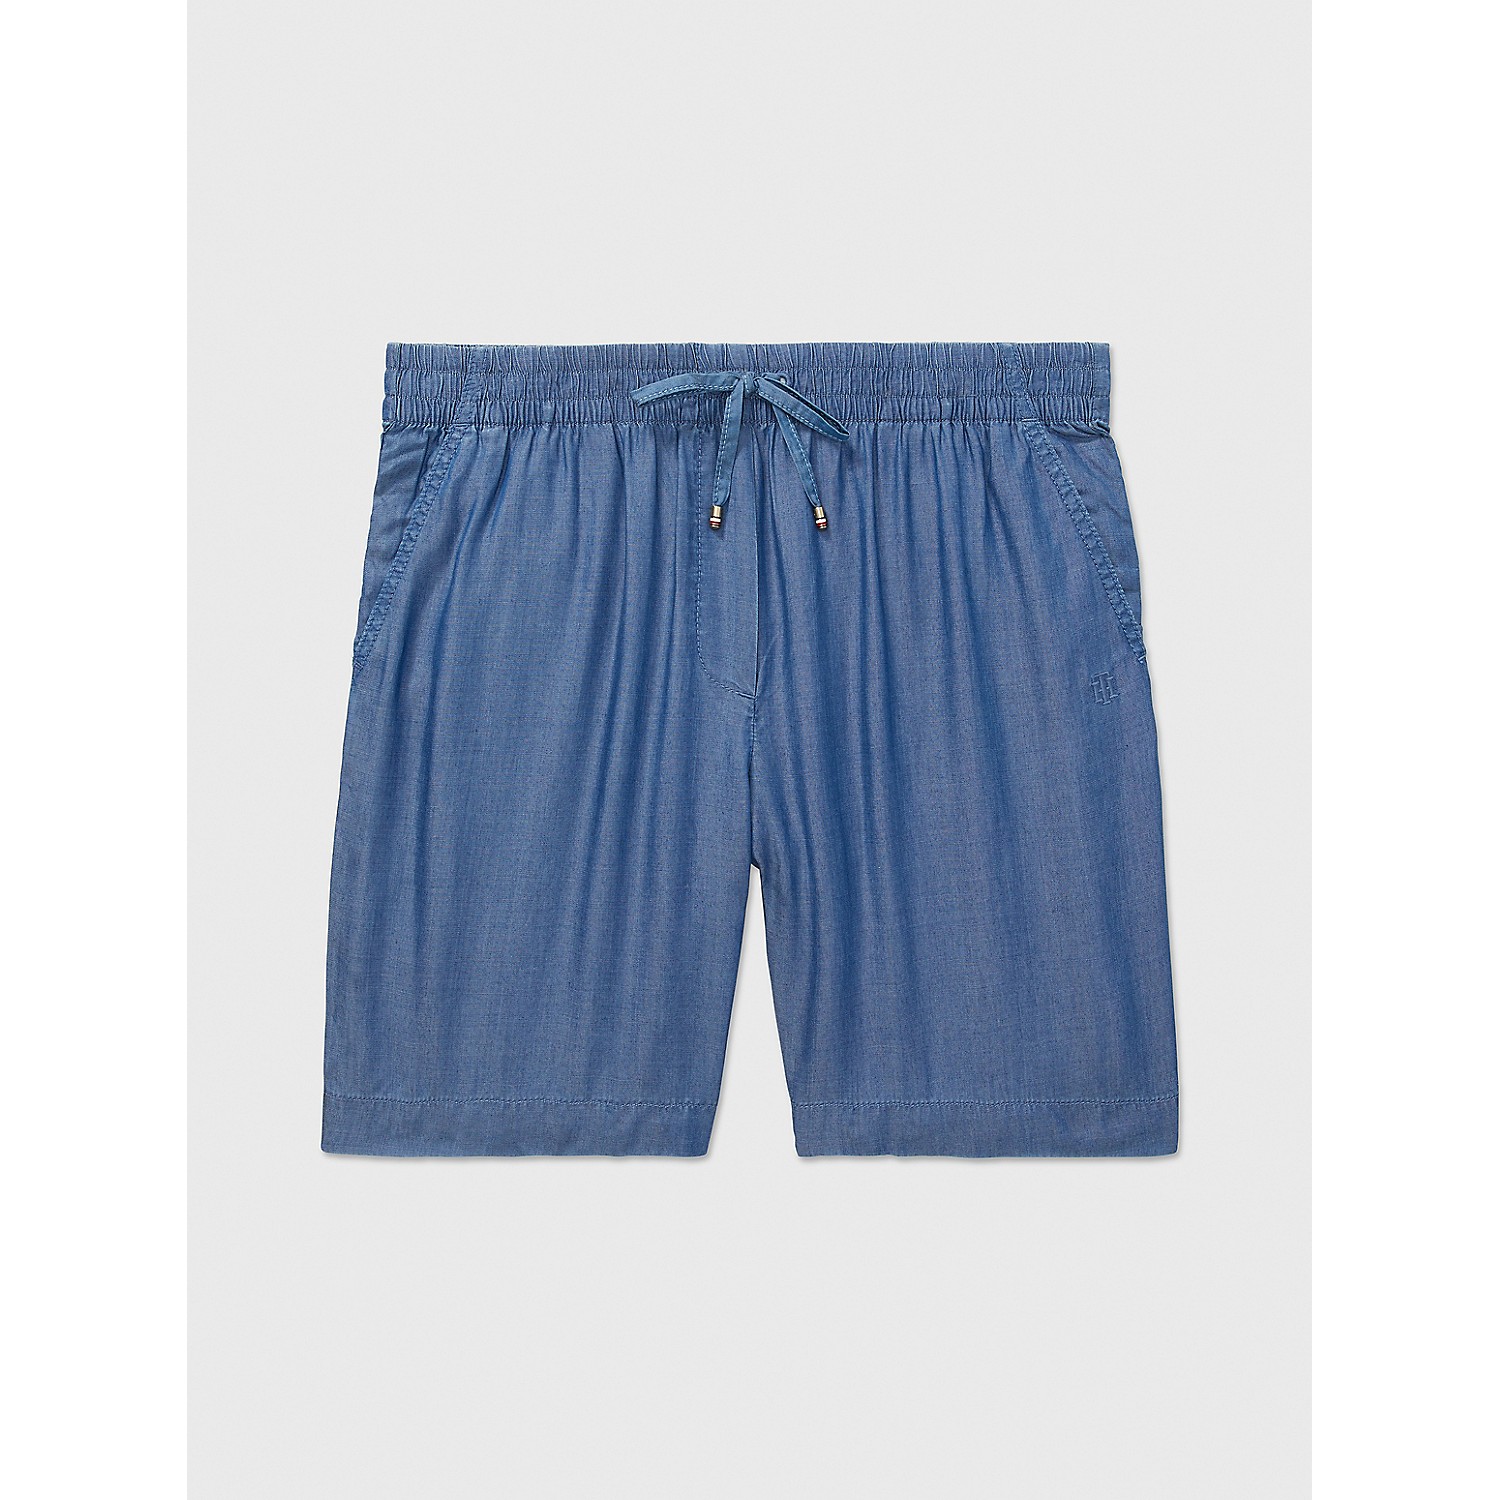 TOMMY HILFIGER Chambray Pull-On Short